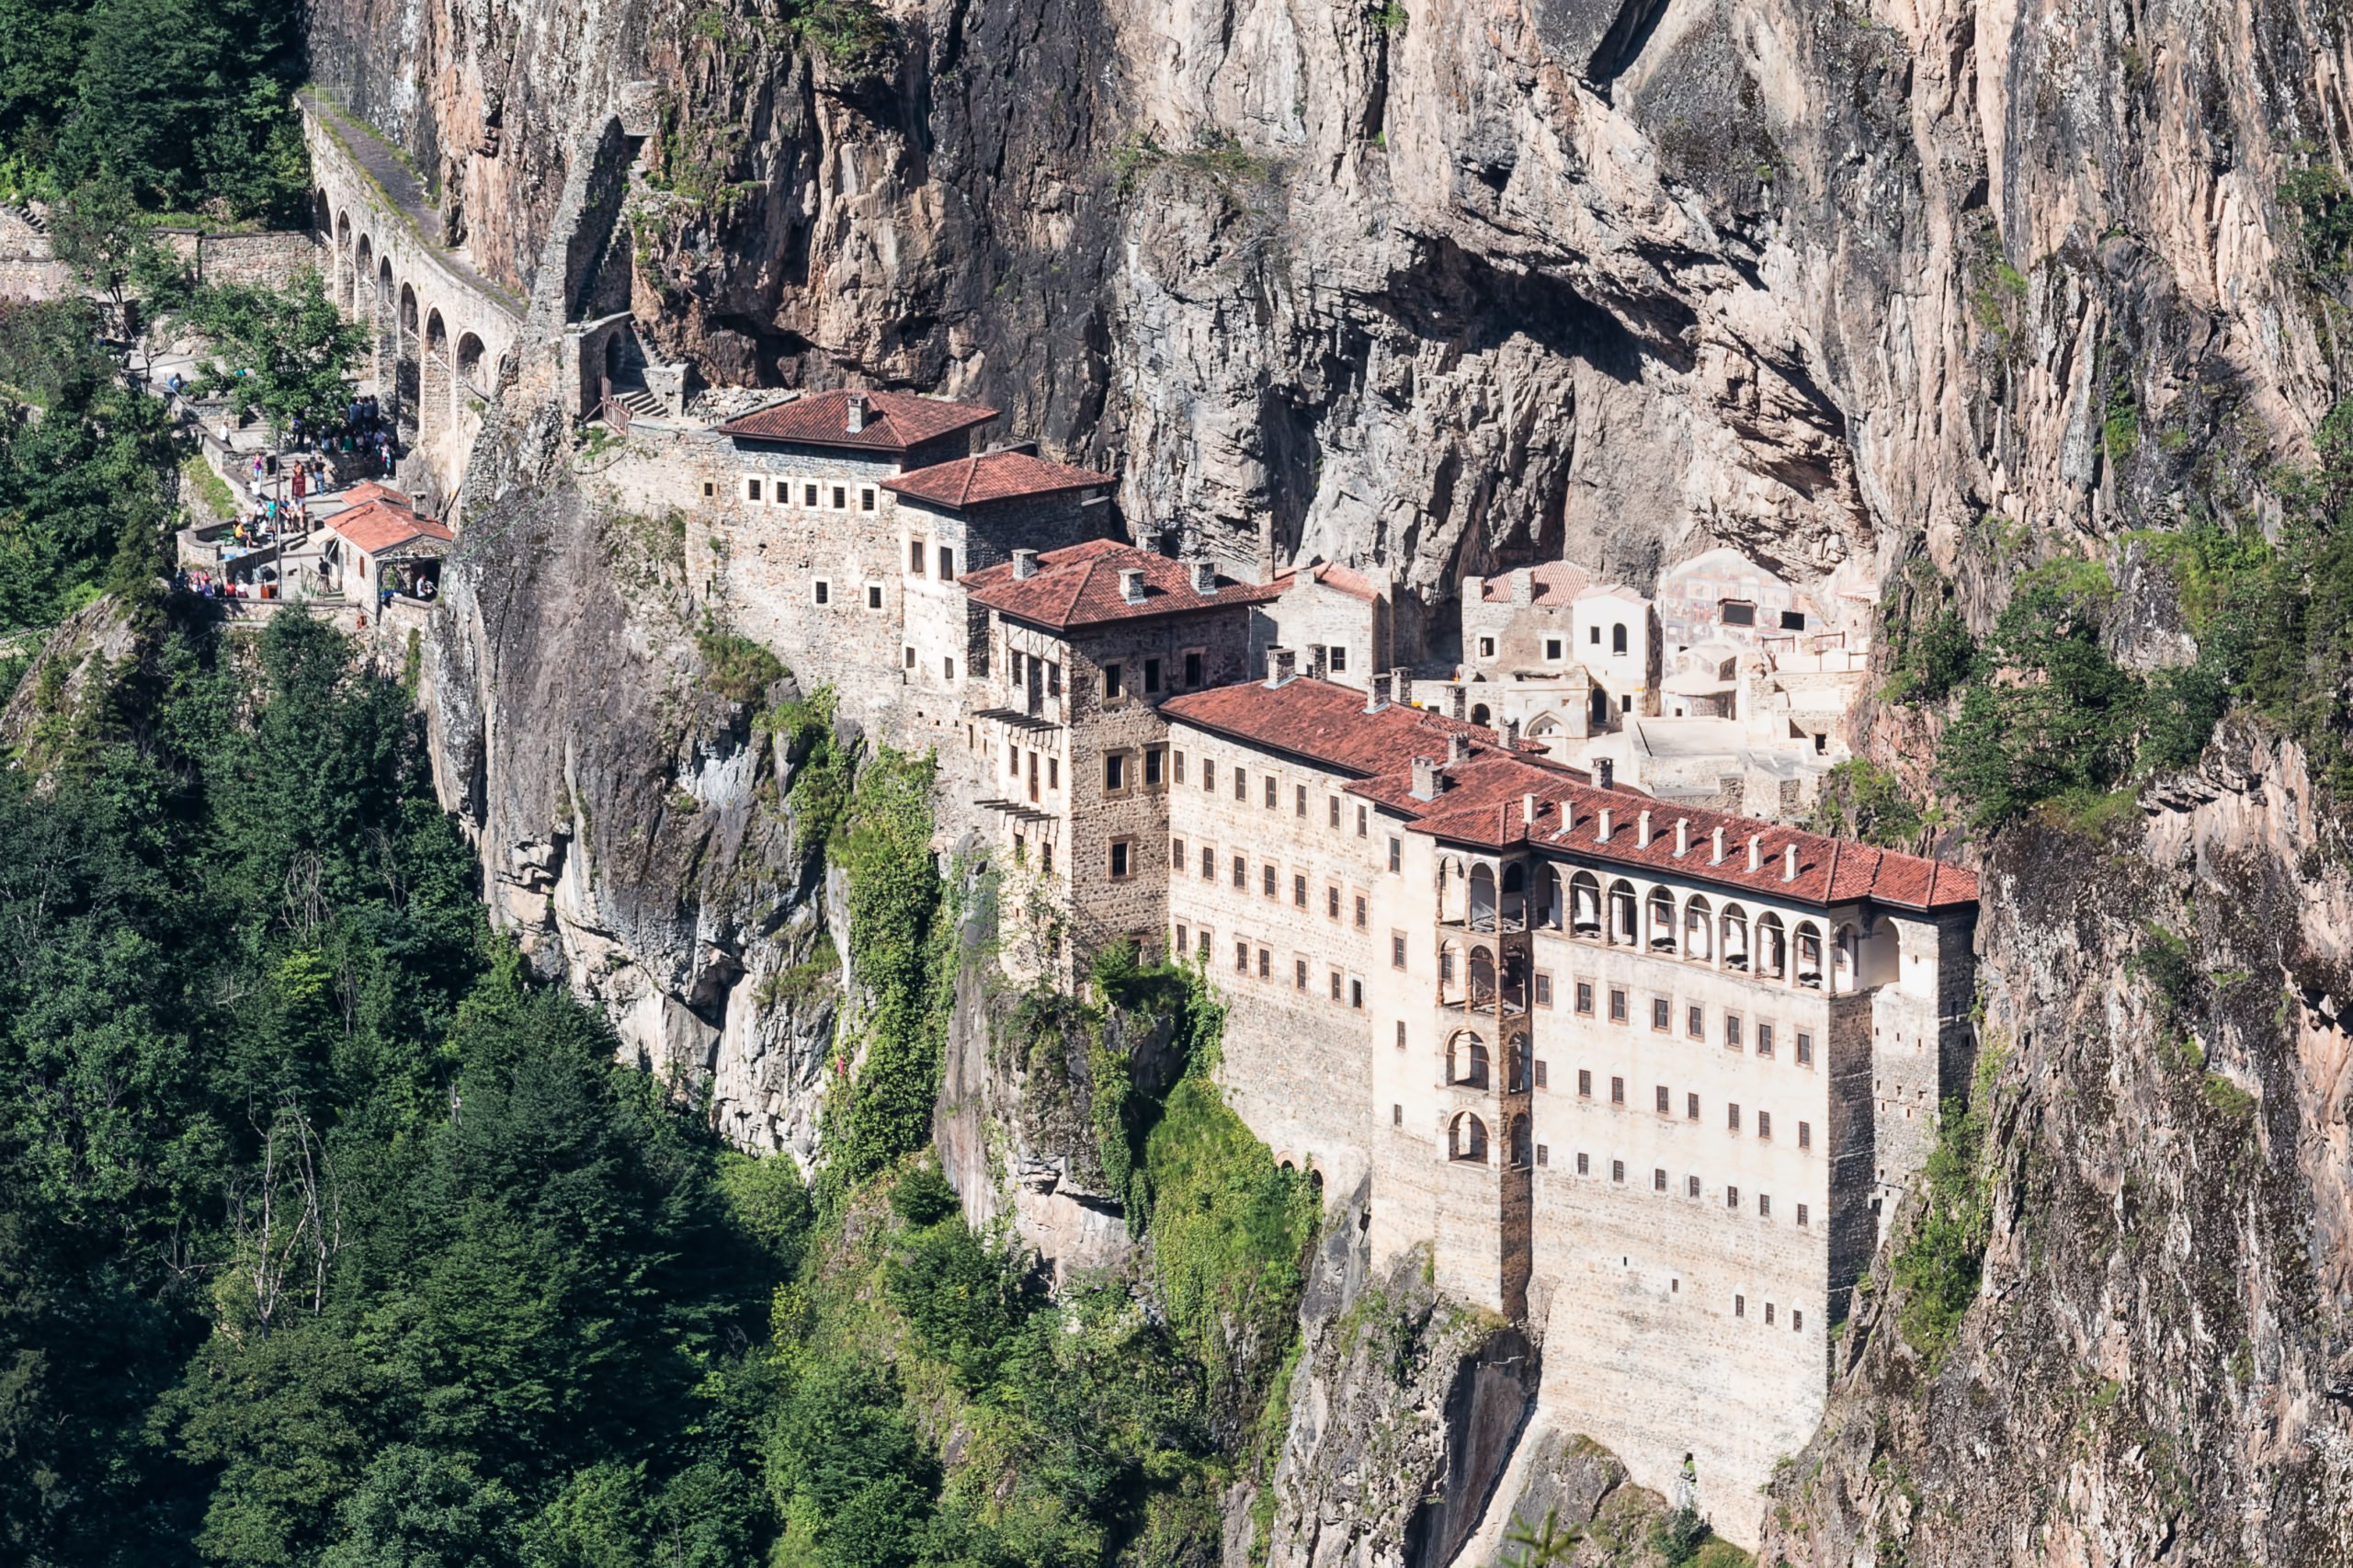 Admire-the-beincredible-Sumela-Monastery-on-the-Sumela-Monastery-Tour-from-Trabzon-scaled.jpg